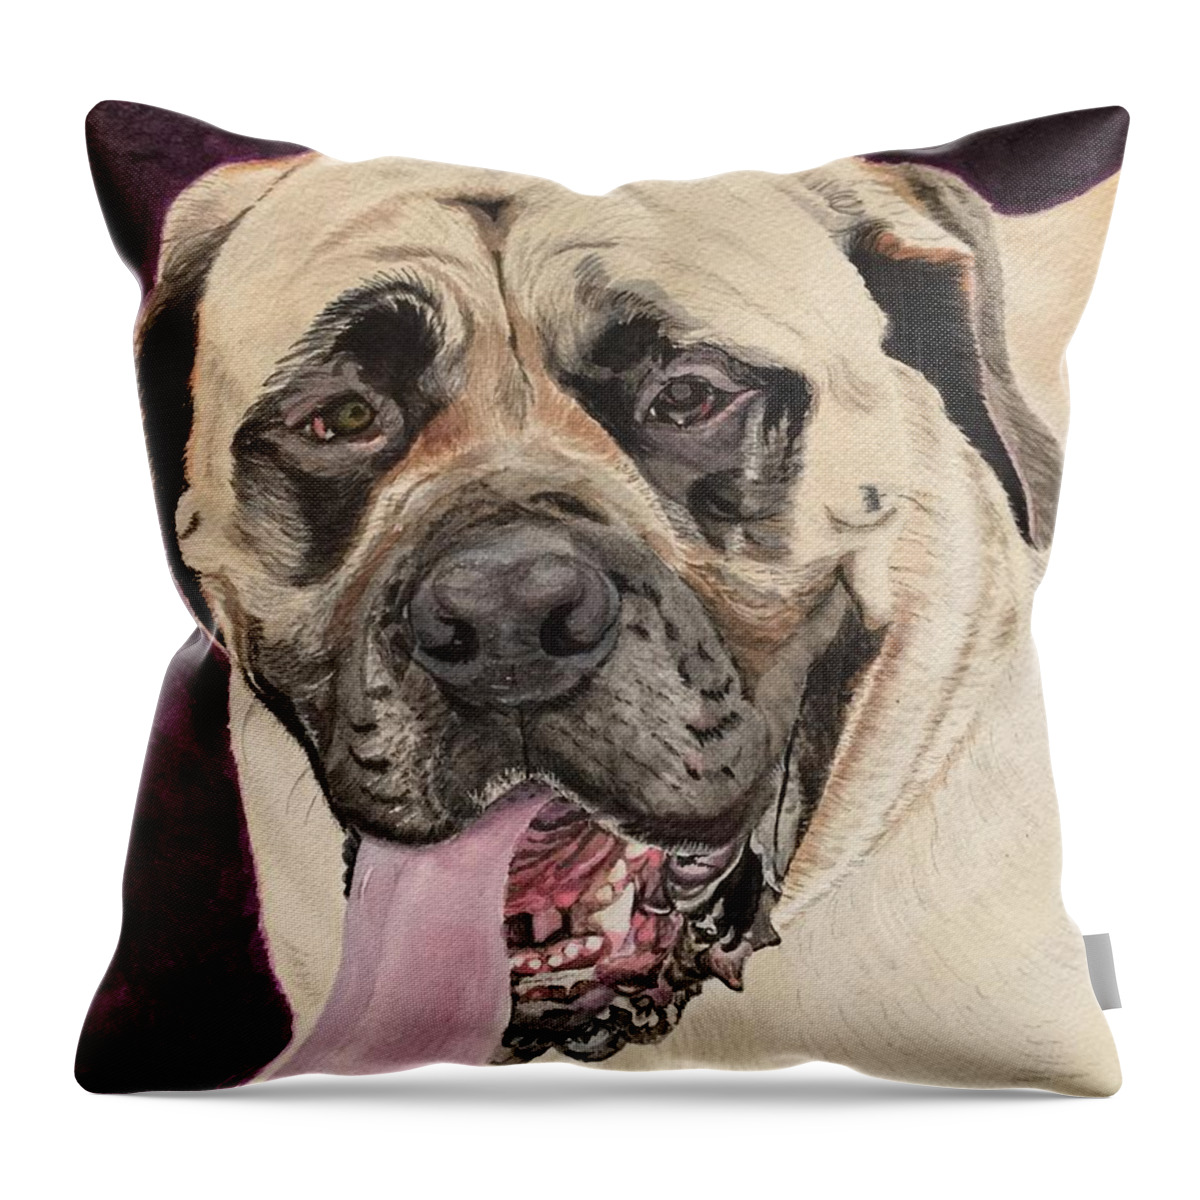 Bullmastiff Throw Pillow featuring the painting Just Chill'n by Sonja Jones